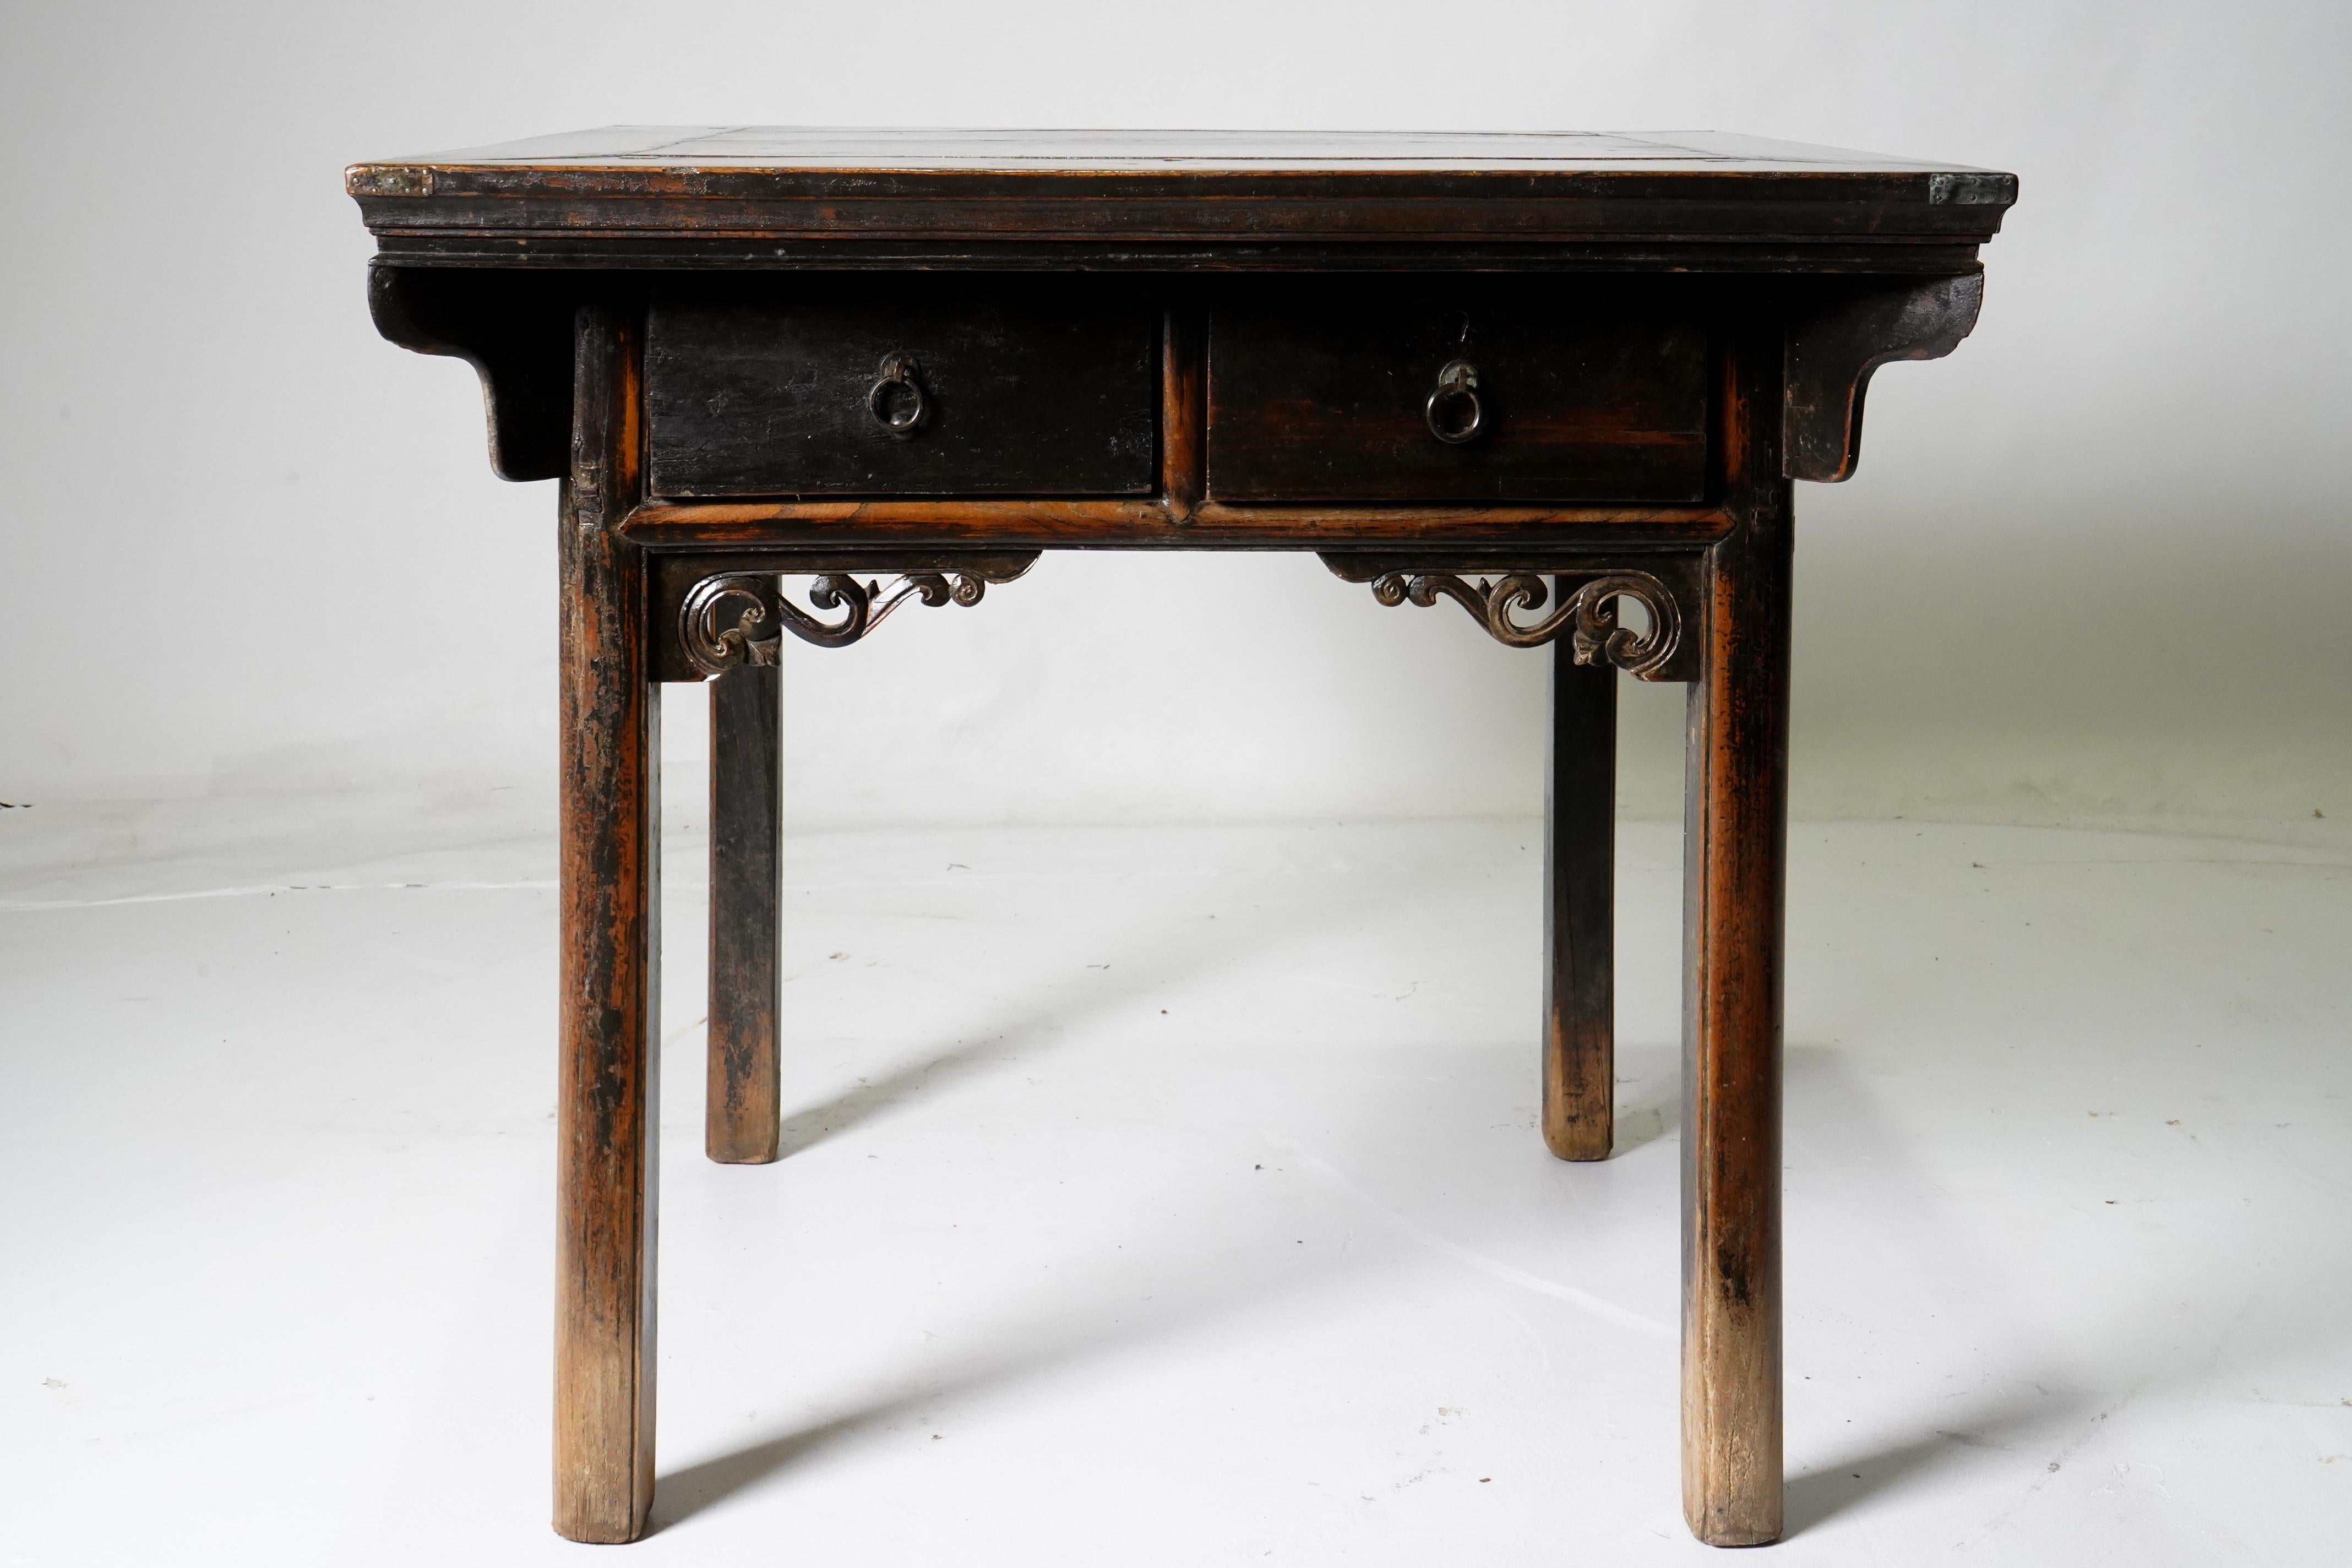 This sturdy, almost architectural Chinese table is is an excellent example of 